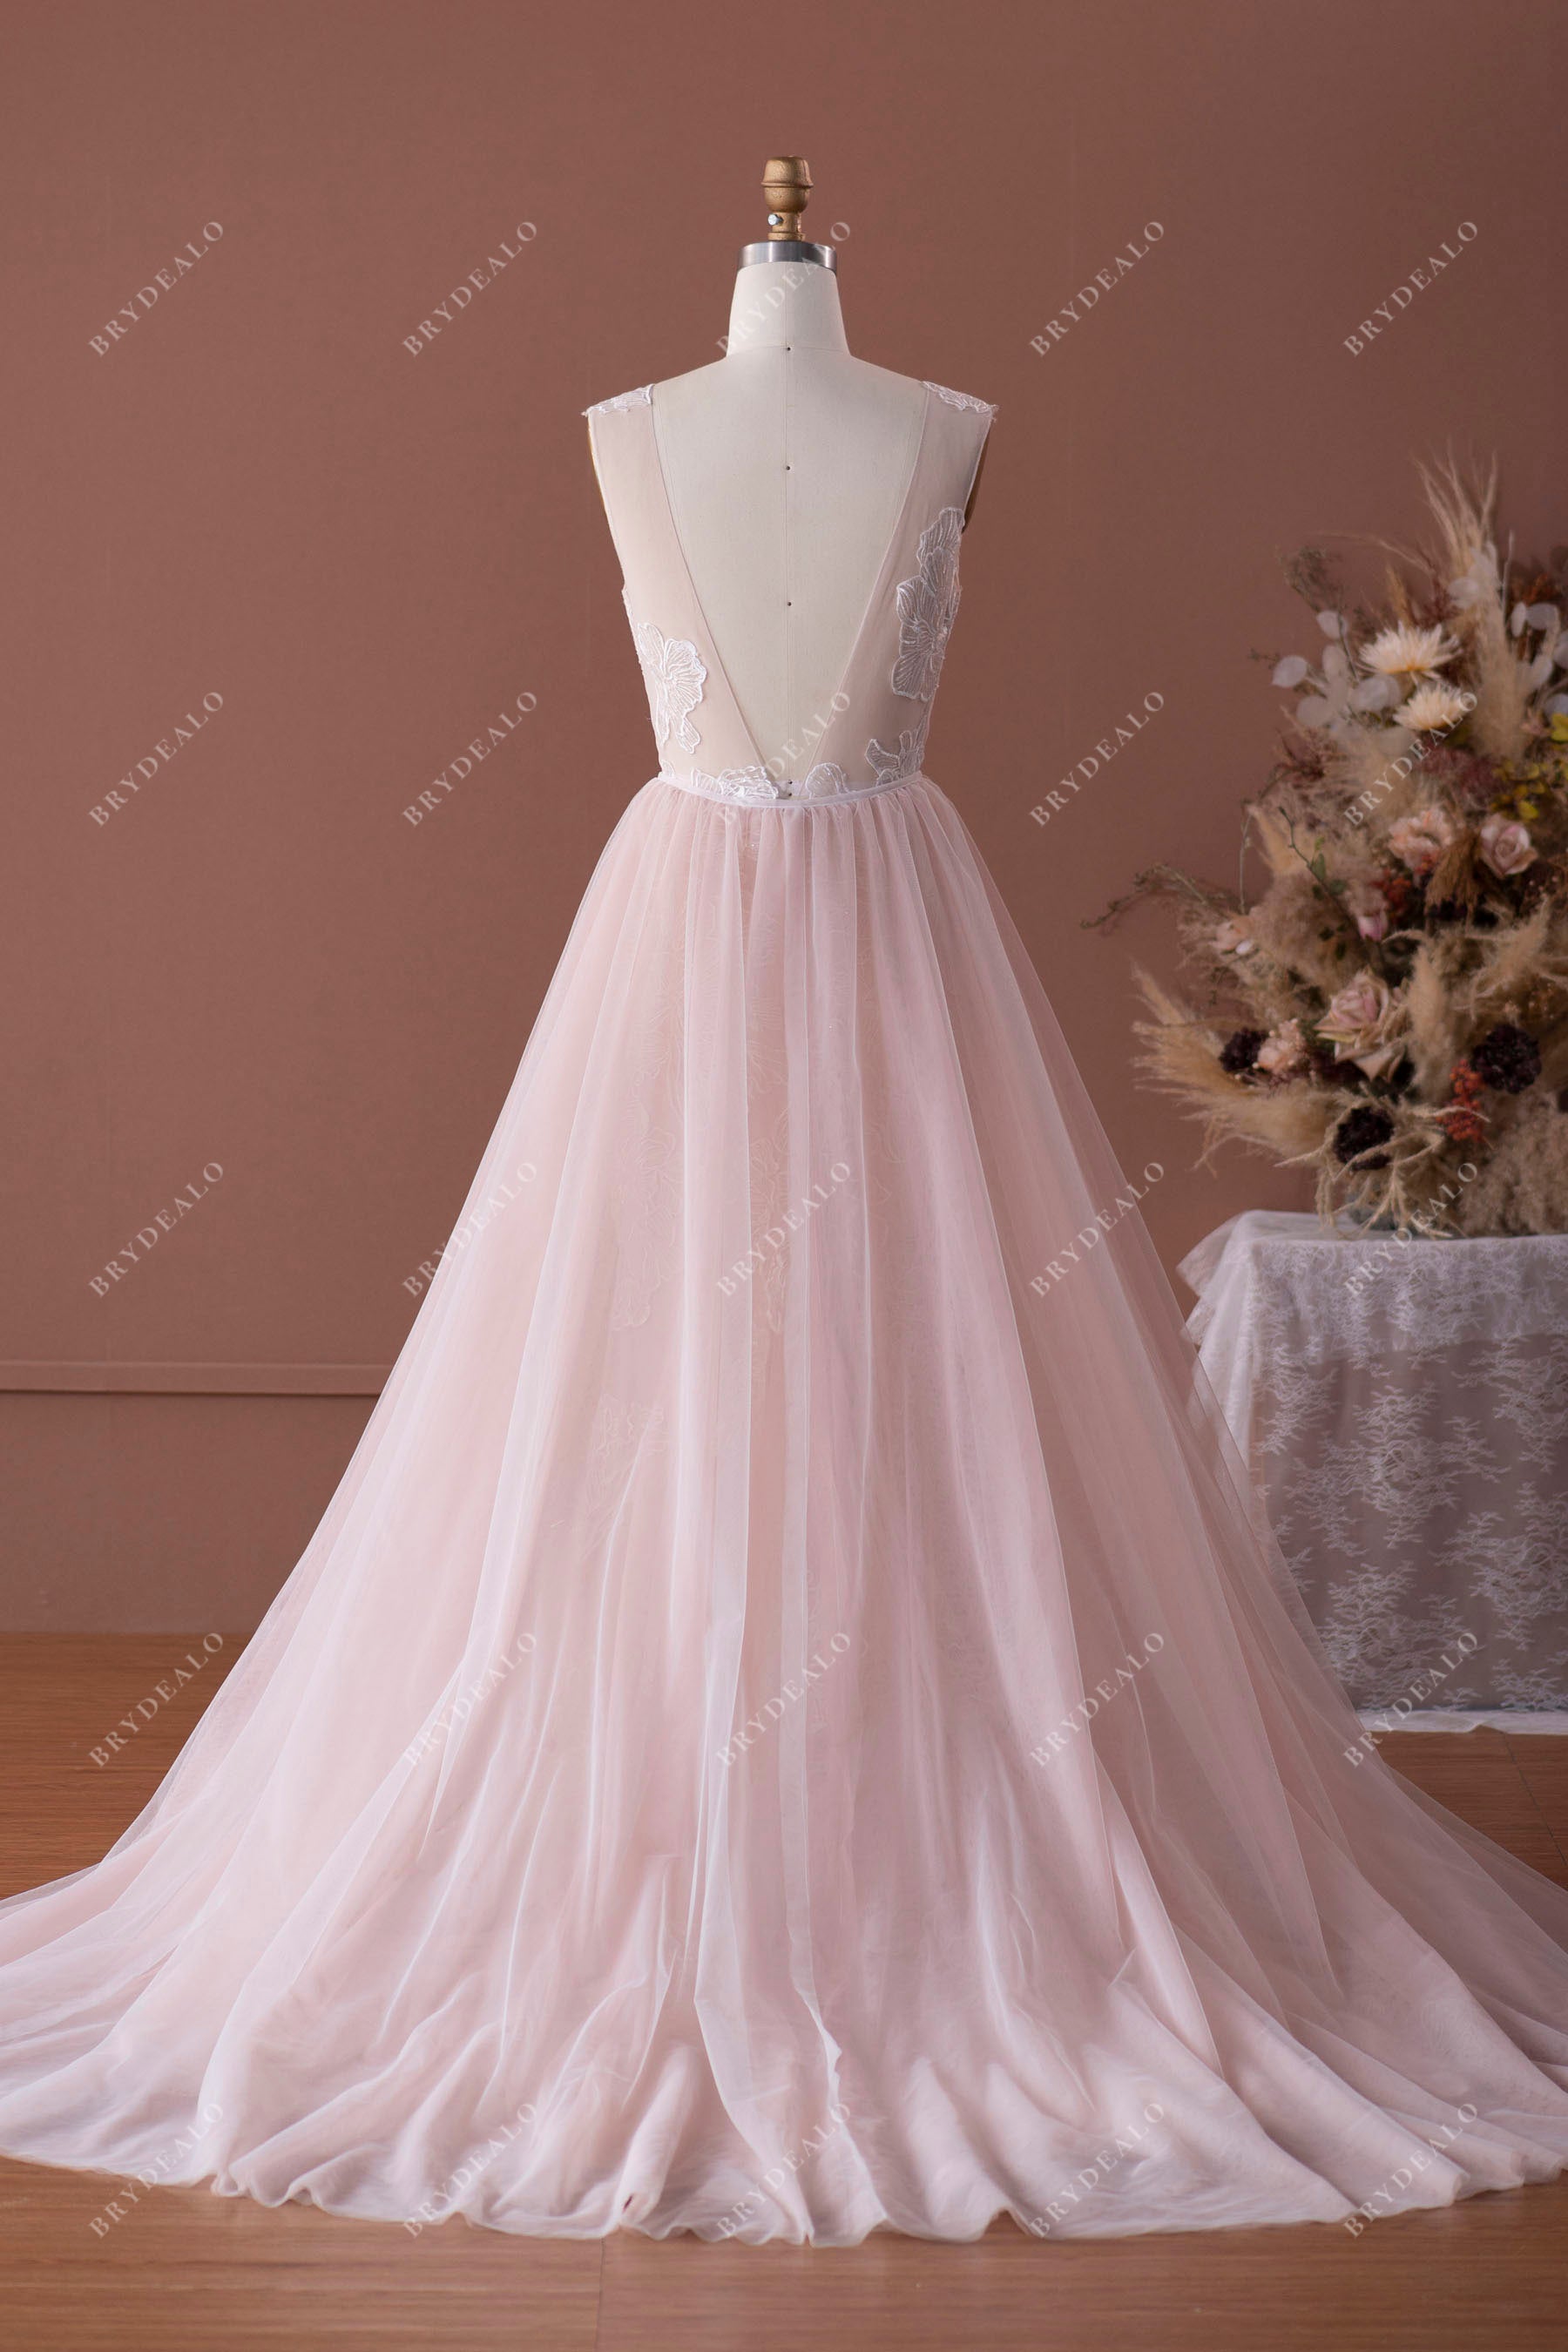 Dusty Rose Bridal Gown with Detachable Overskirt